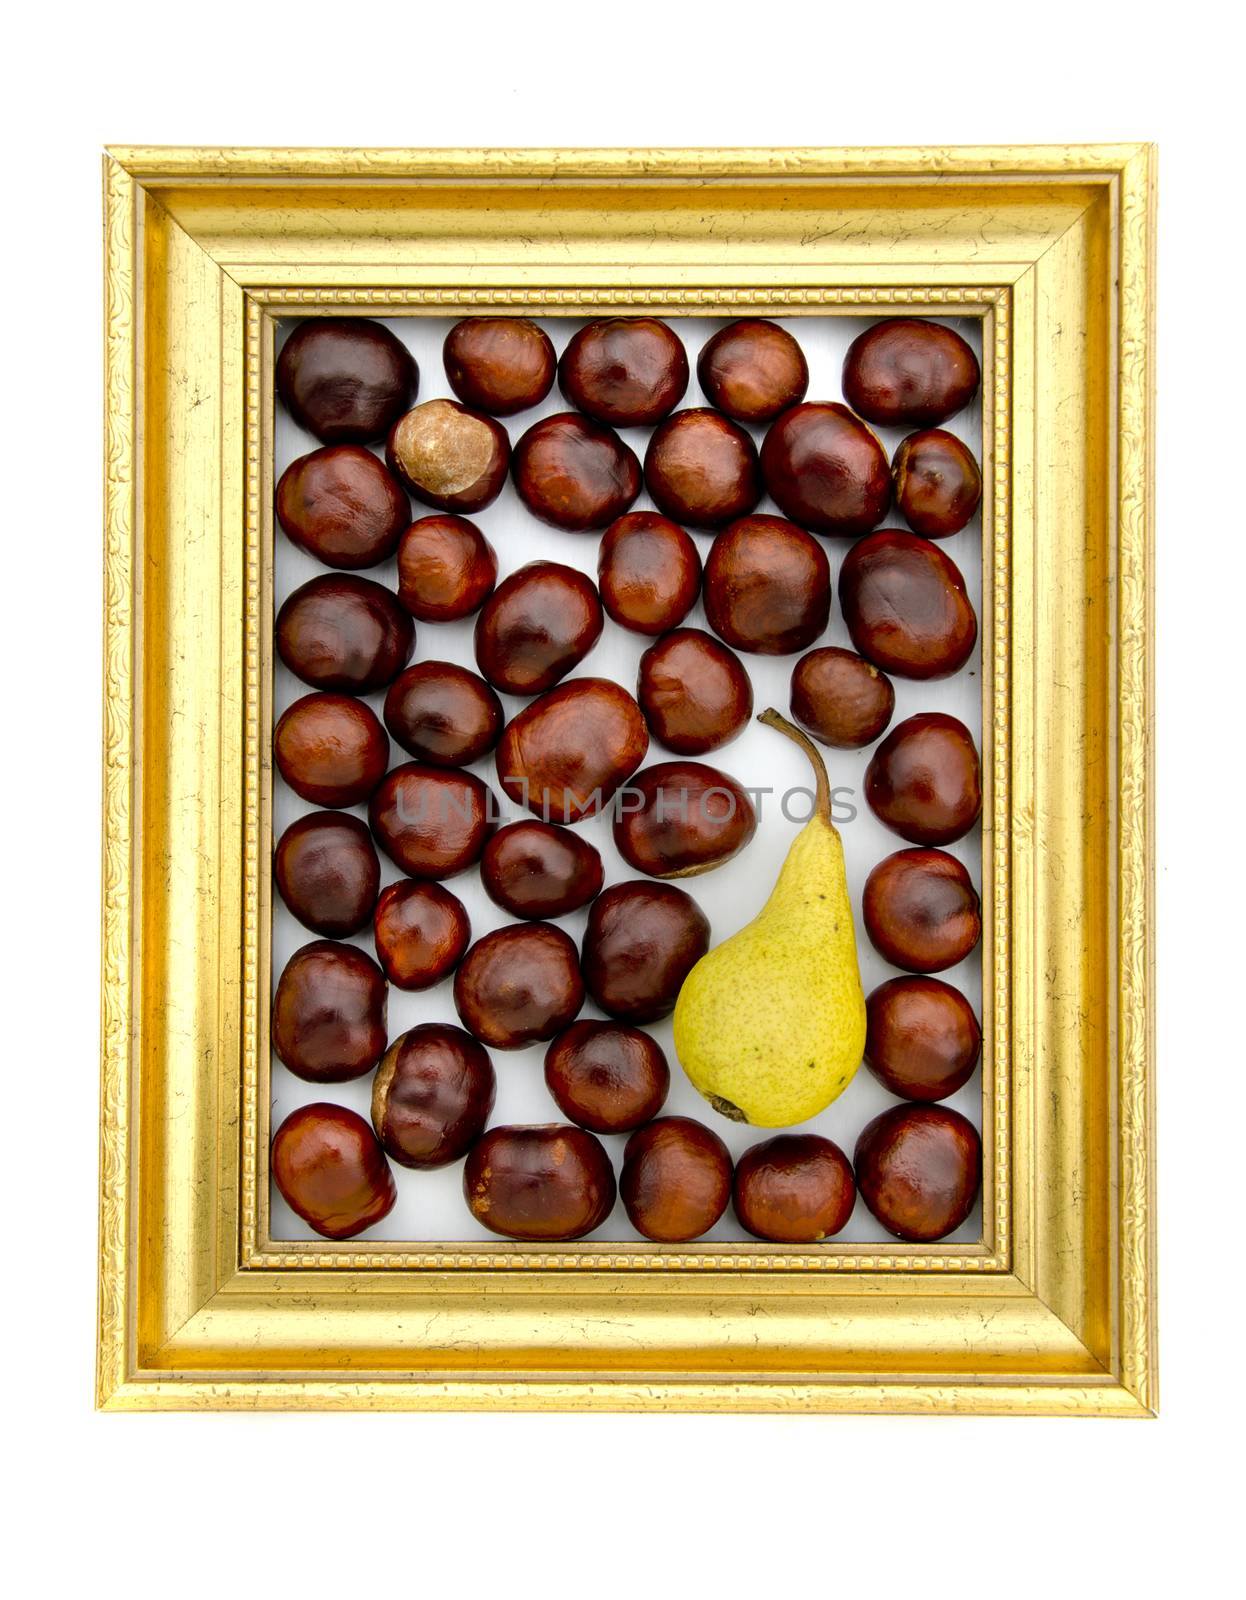 conker fruits and pear in in golden retro frame isolated on white